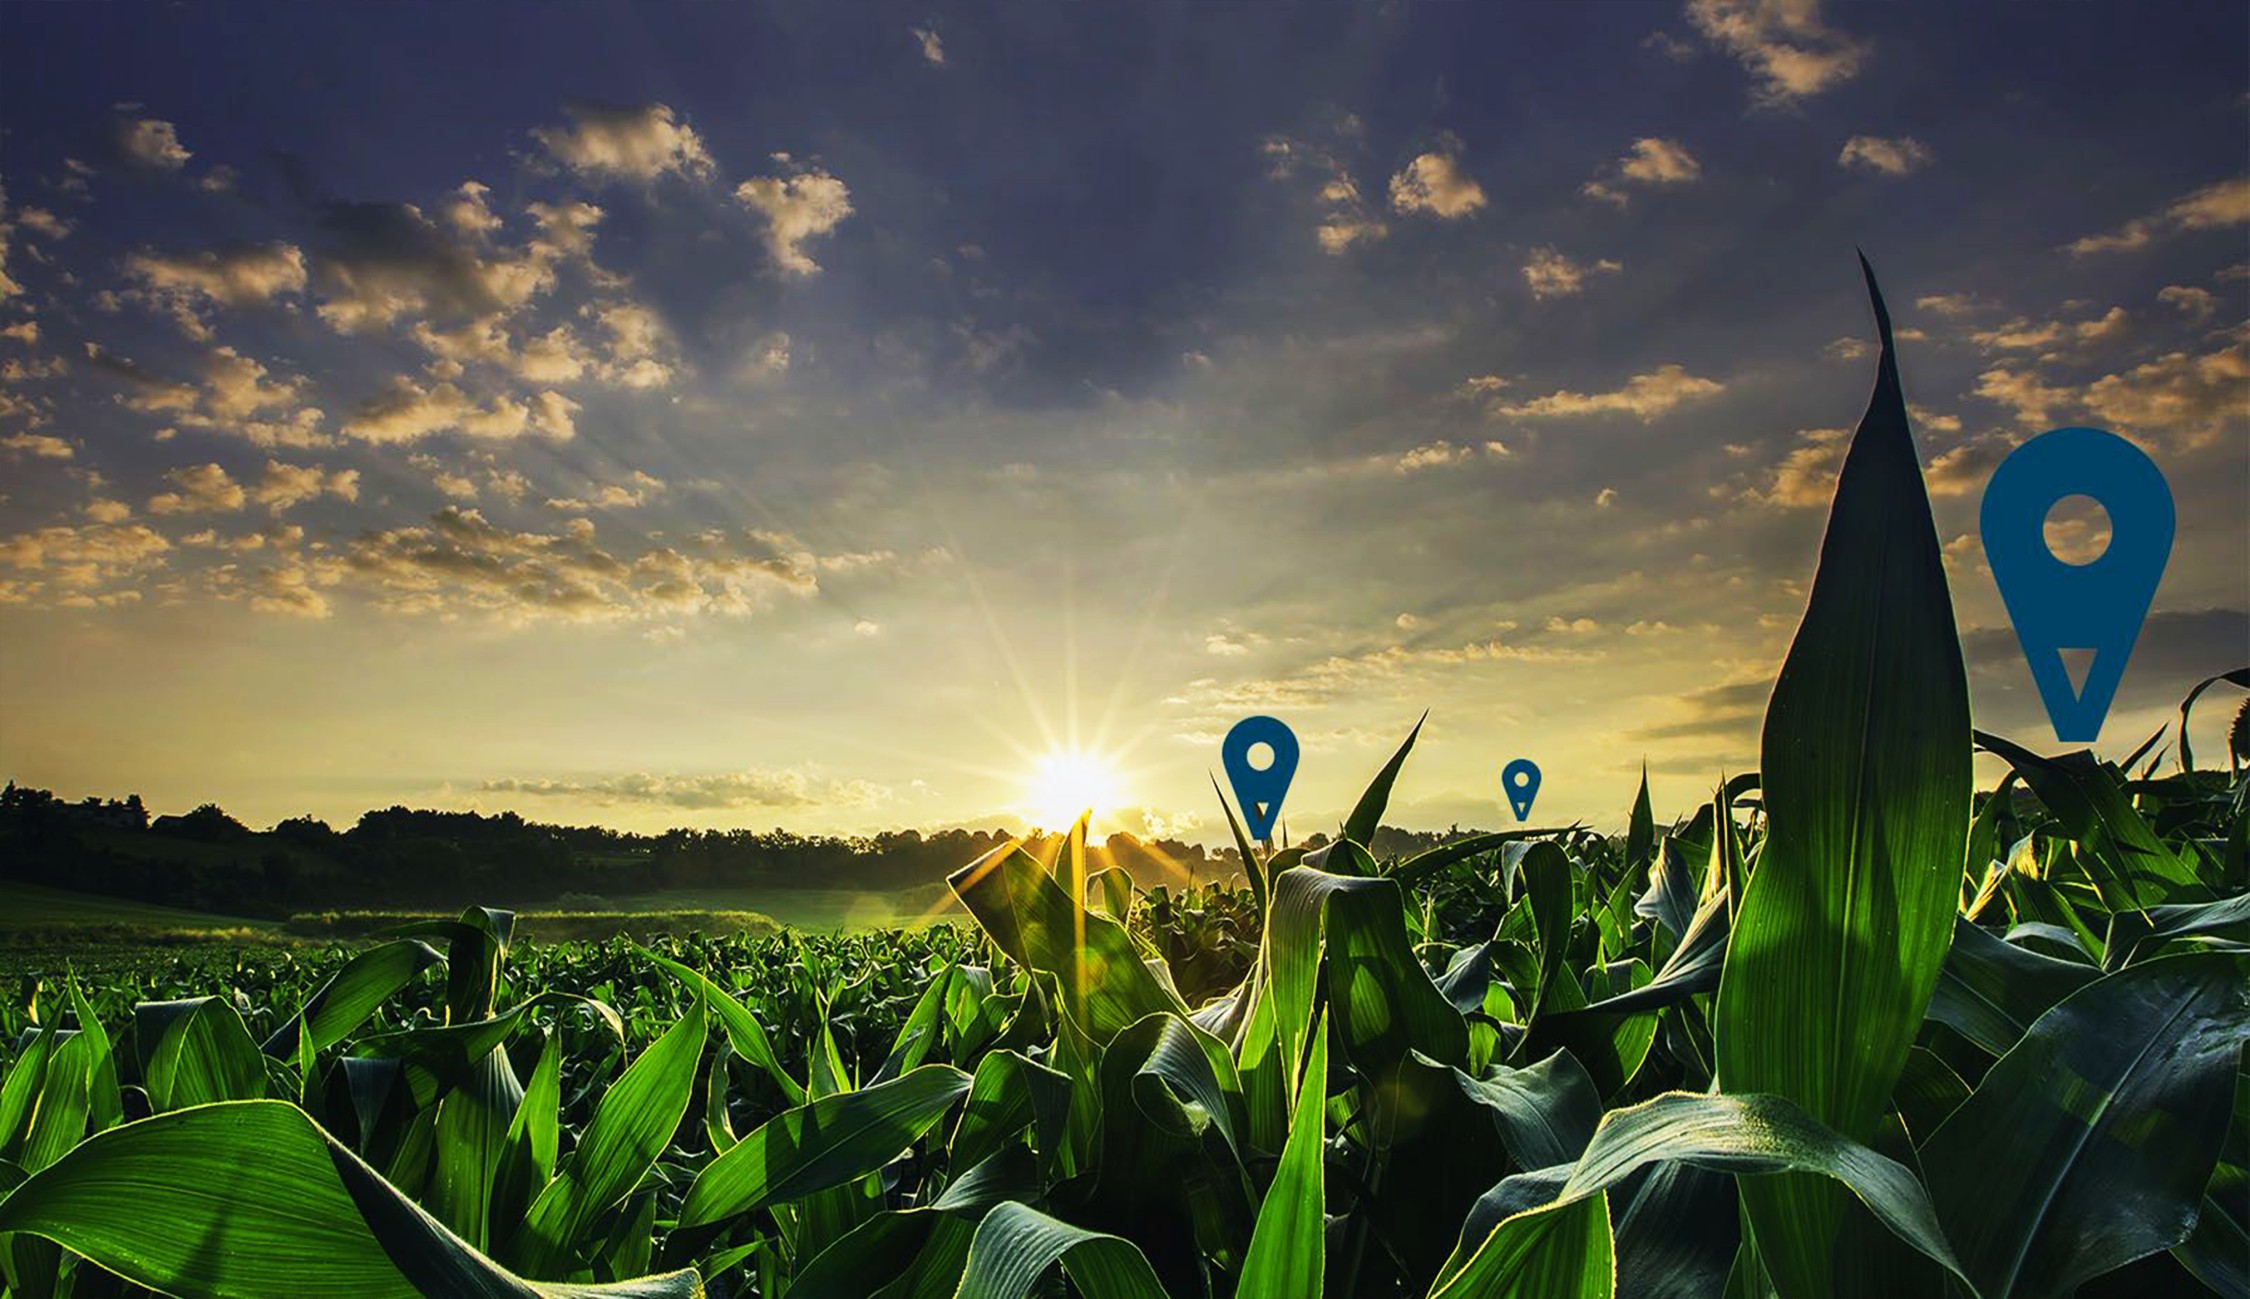 ROLE OF INFORMATION TECHNOLOGY (IT) IN AGRICULTURE